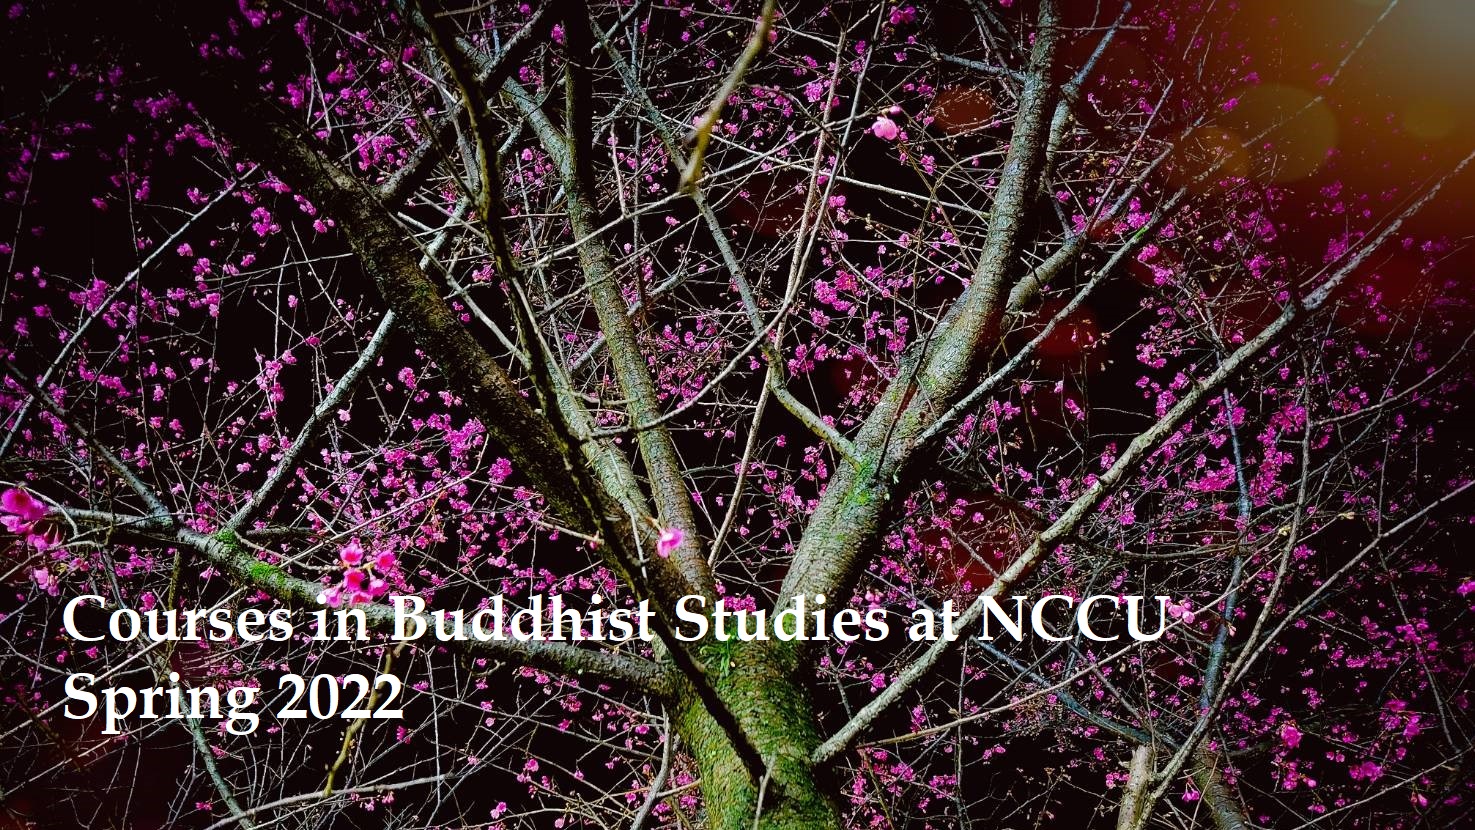 Courses in Buddhist Studies at NCCU, Spring 2022